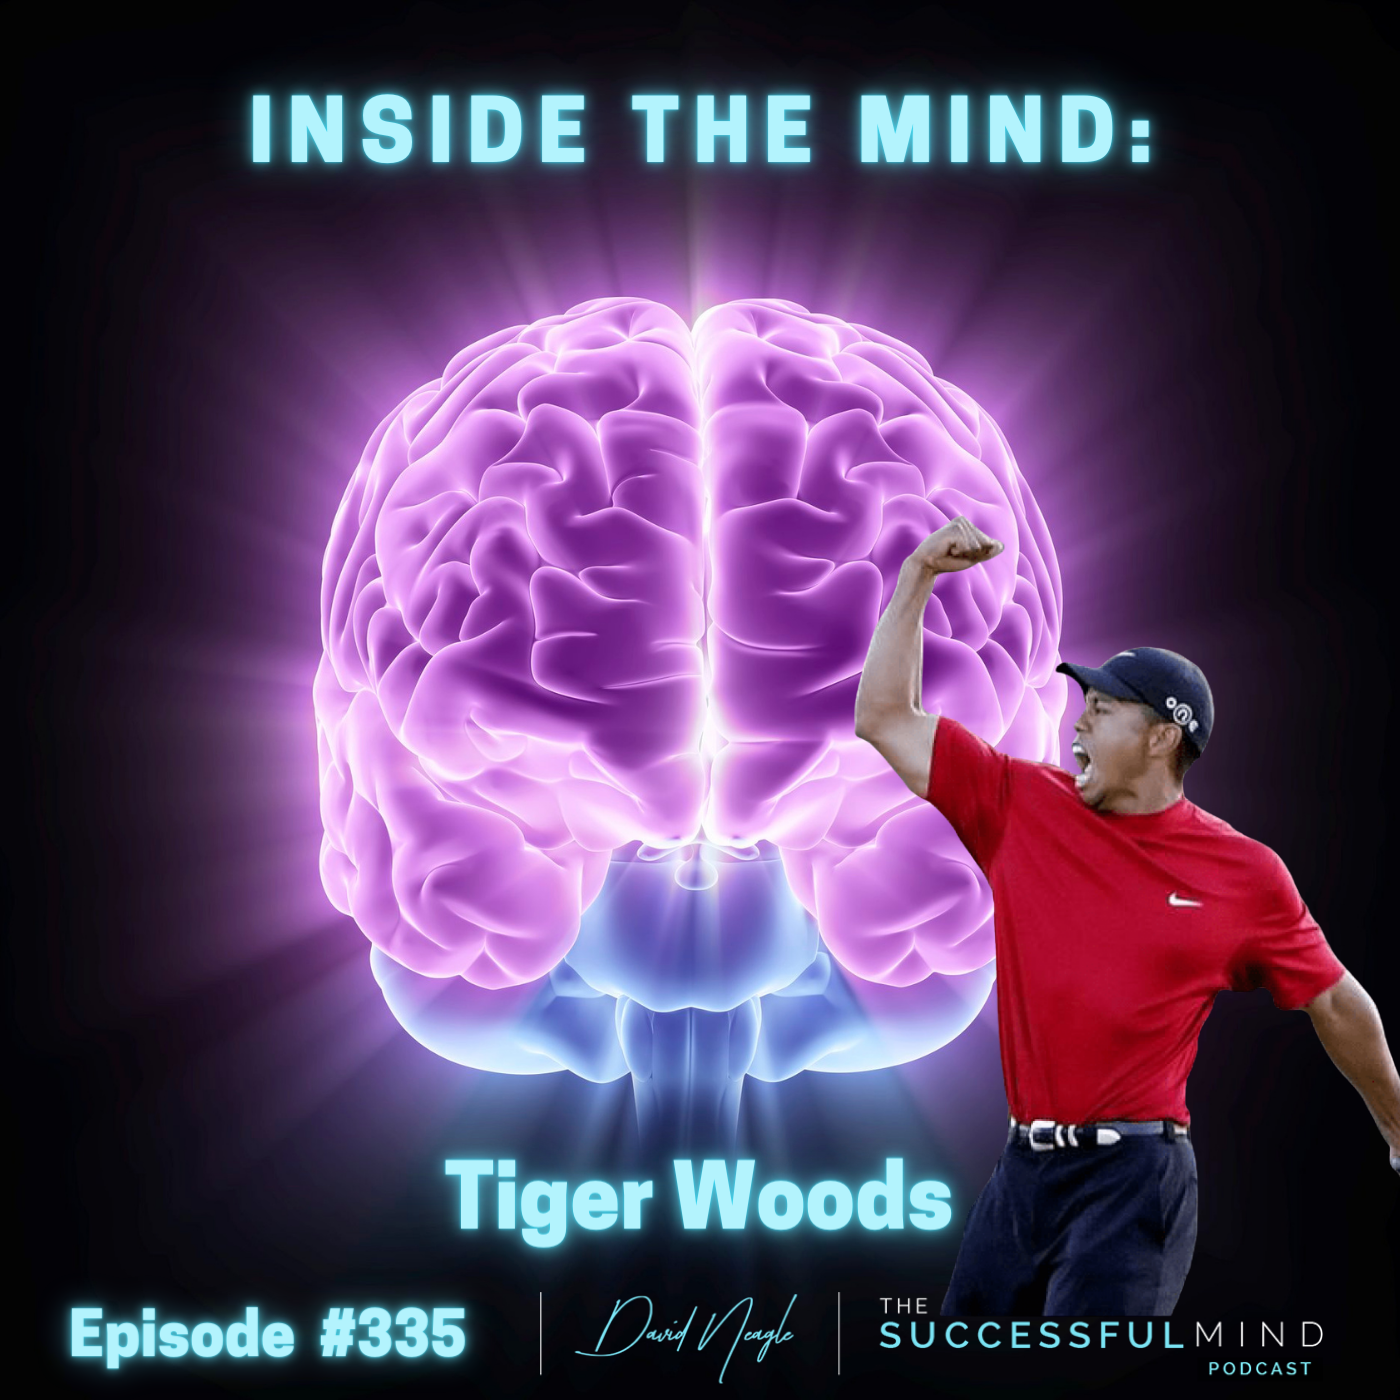 The Successful Mind Podcast - Episode 335 - Inside The Mind: Tiger Woods